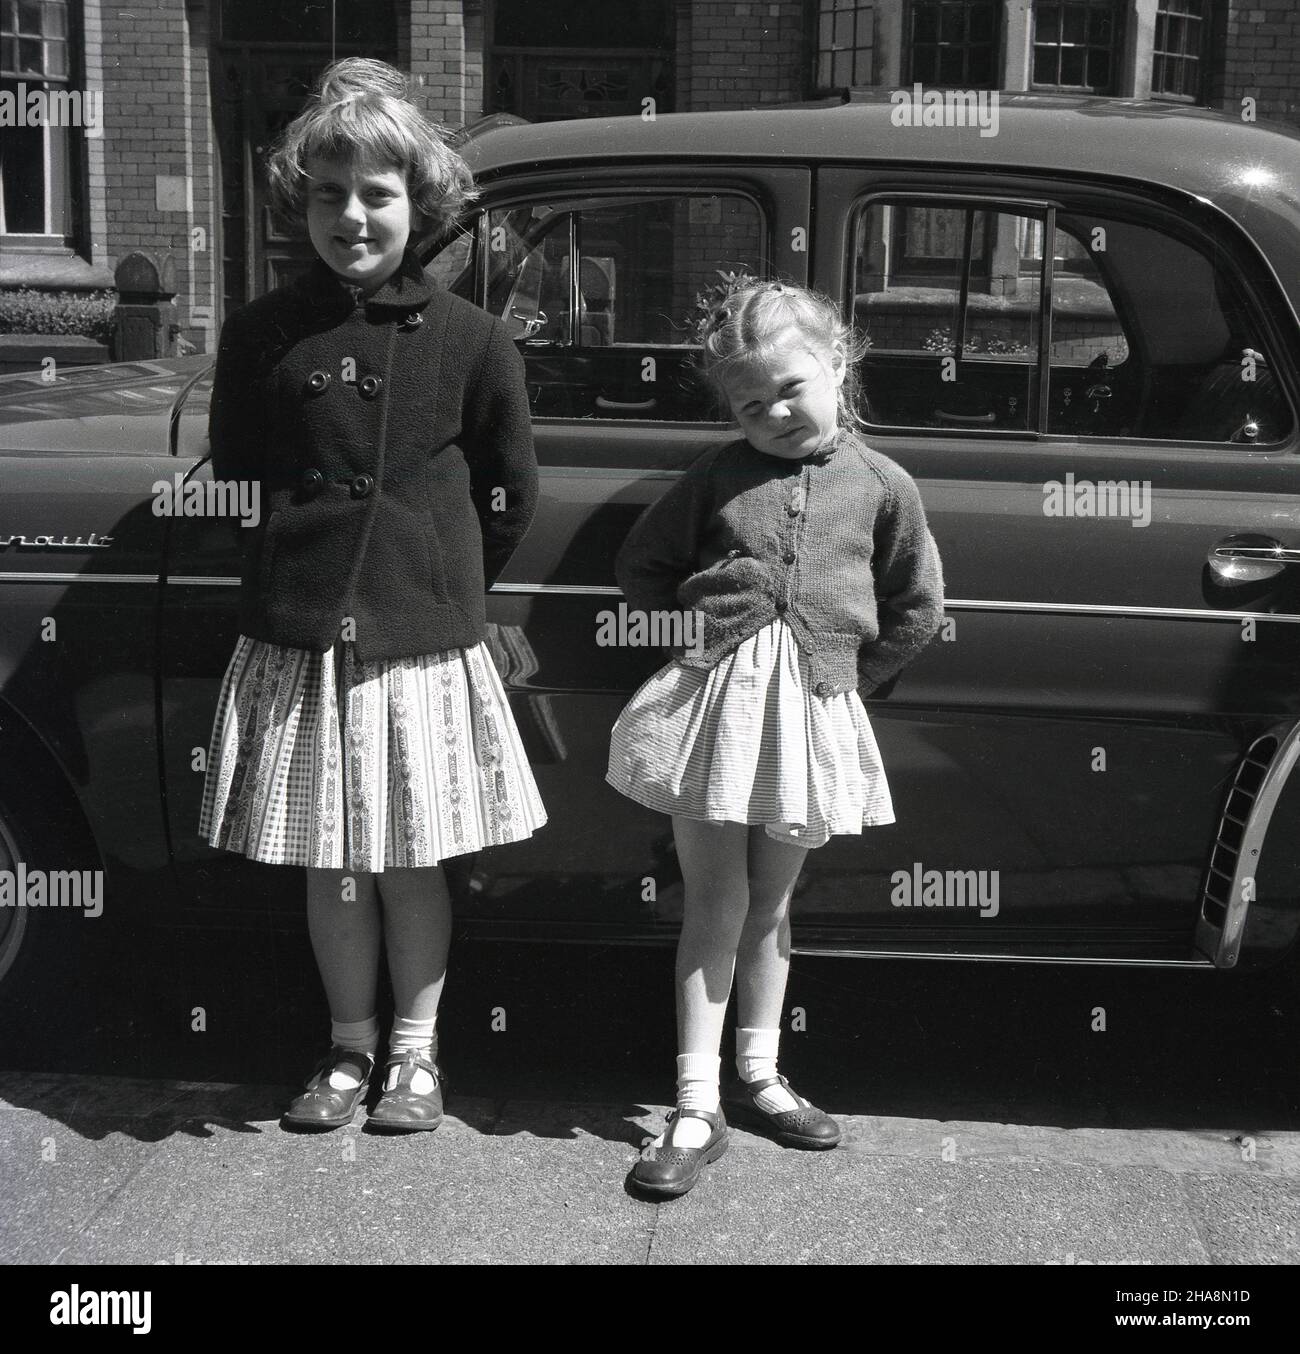 1958, historical, two young girls, sisters, stand outside in a British street by their father's car, a French Renault Dauphine, a rear-engined 4-door economy car, a successor to the Renault 4CV.  Between 1957 and 1961, Dauphines were assembled at Renault's Acton plant in West London and one was even driven HM the Queen. Roomy, with distinctive styling, the Dauphine car was a global success for Renault. Stock Photo